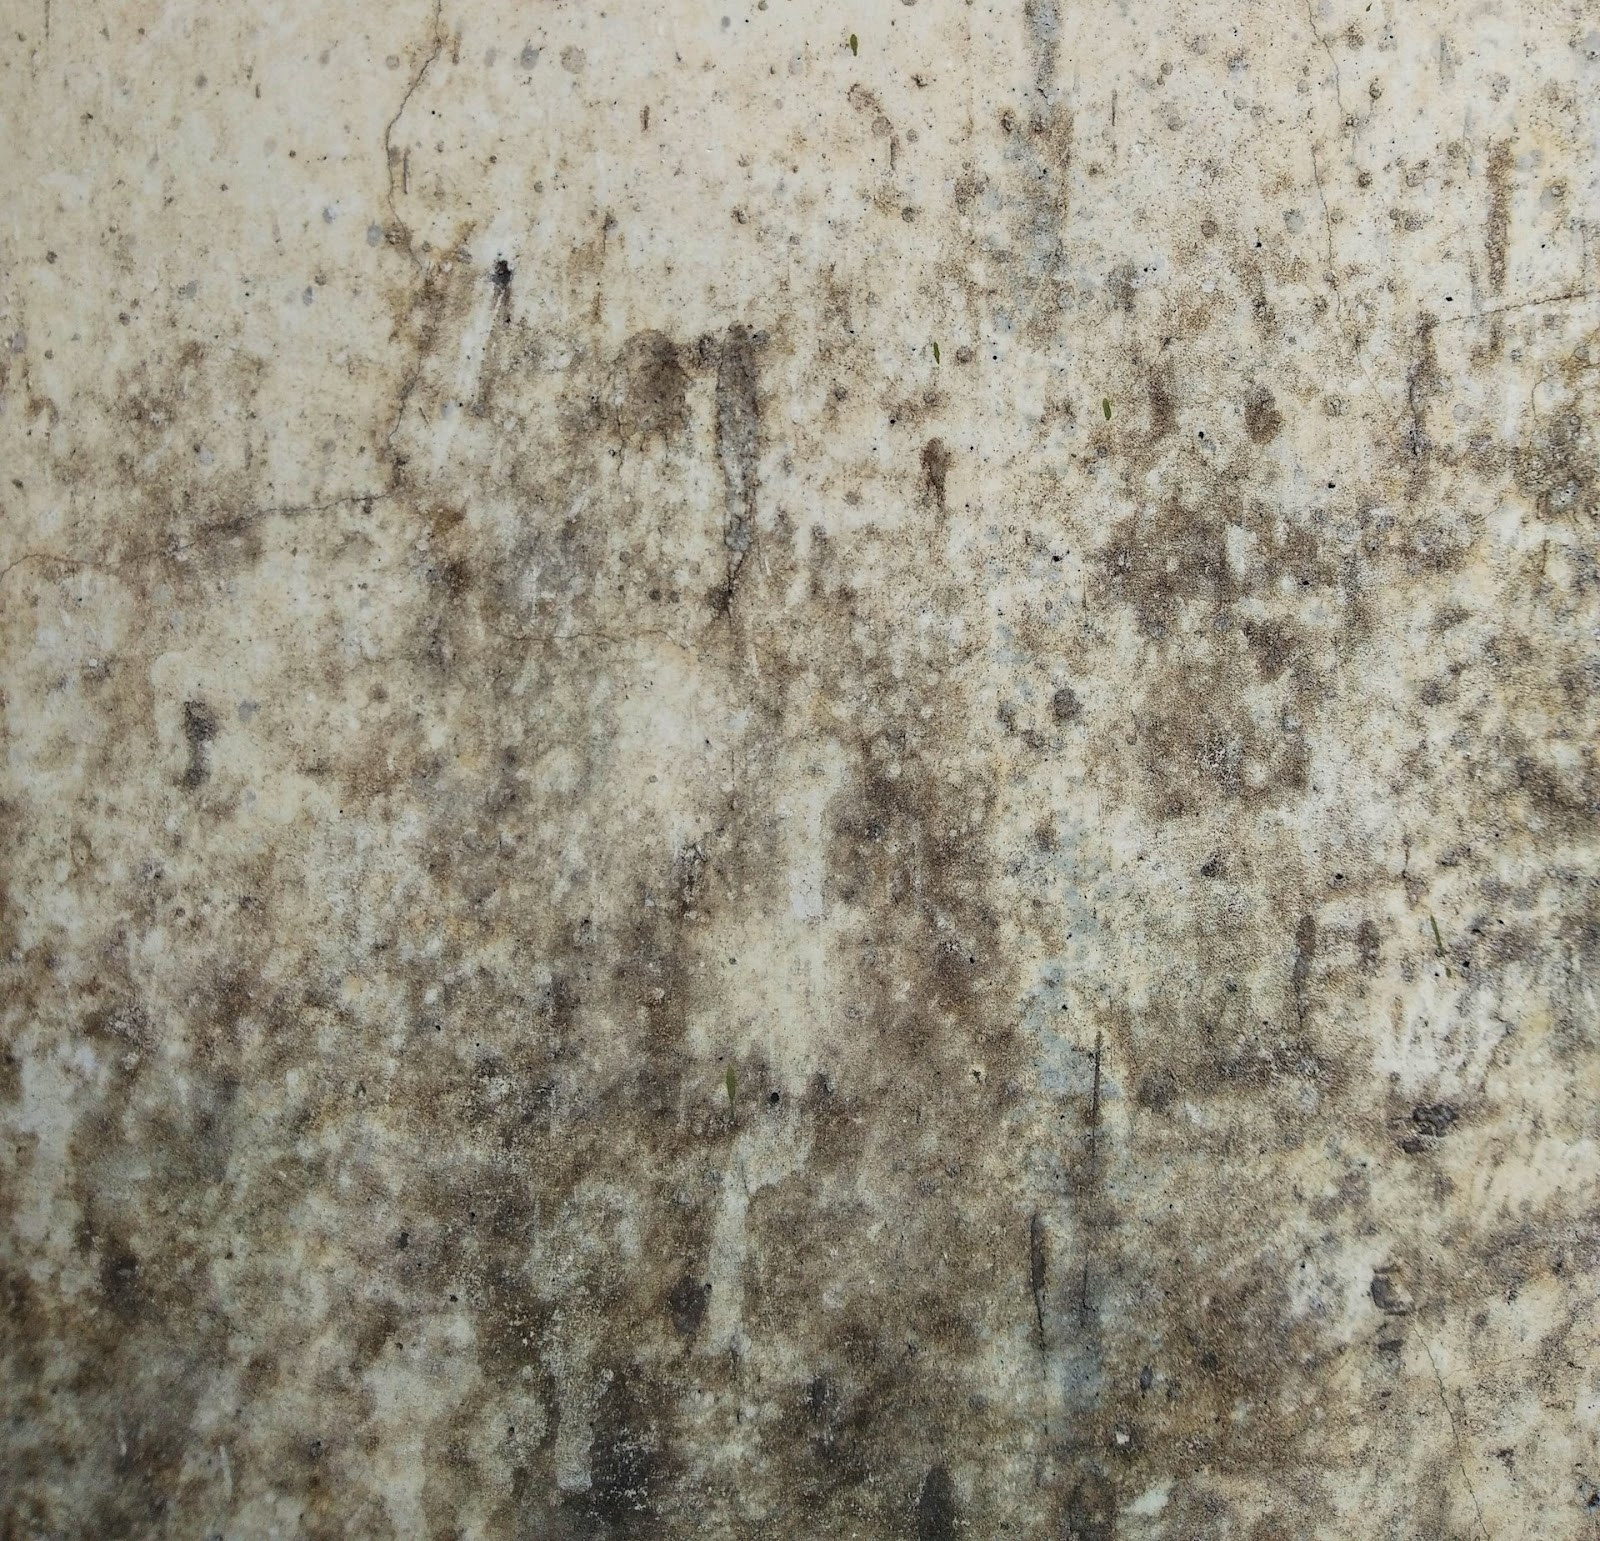 A close up image of black mould across a white wall